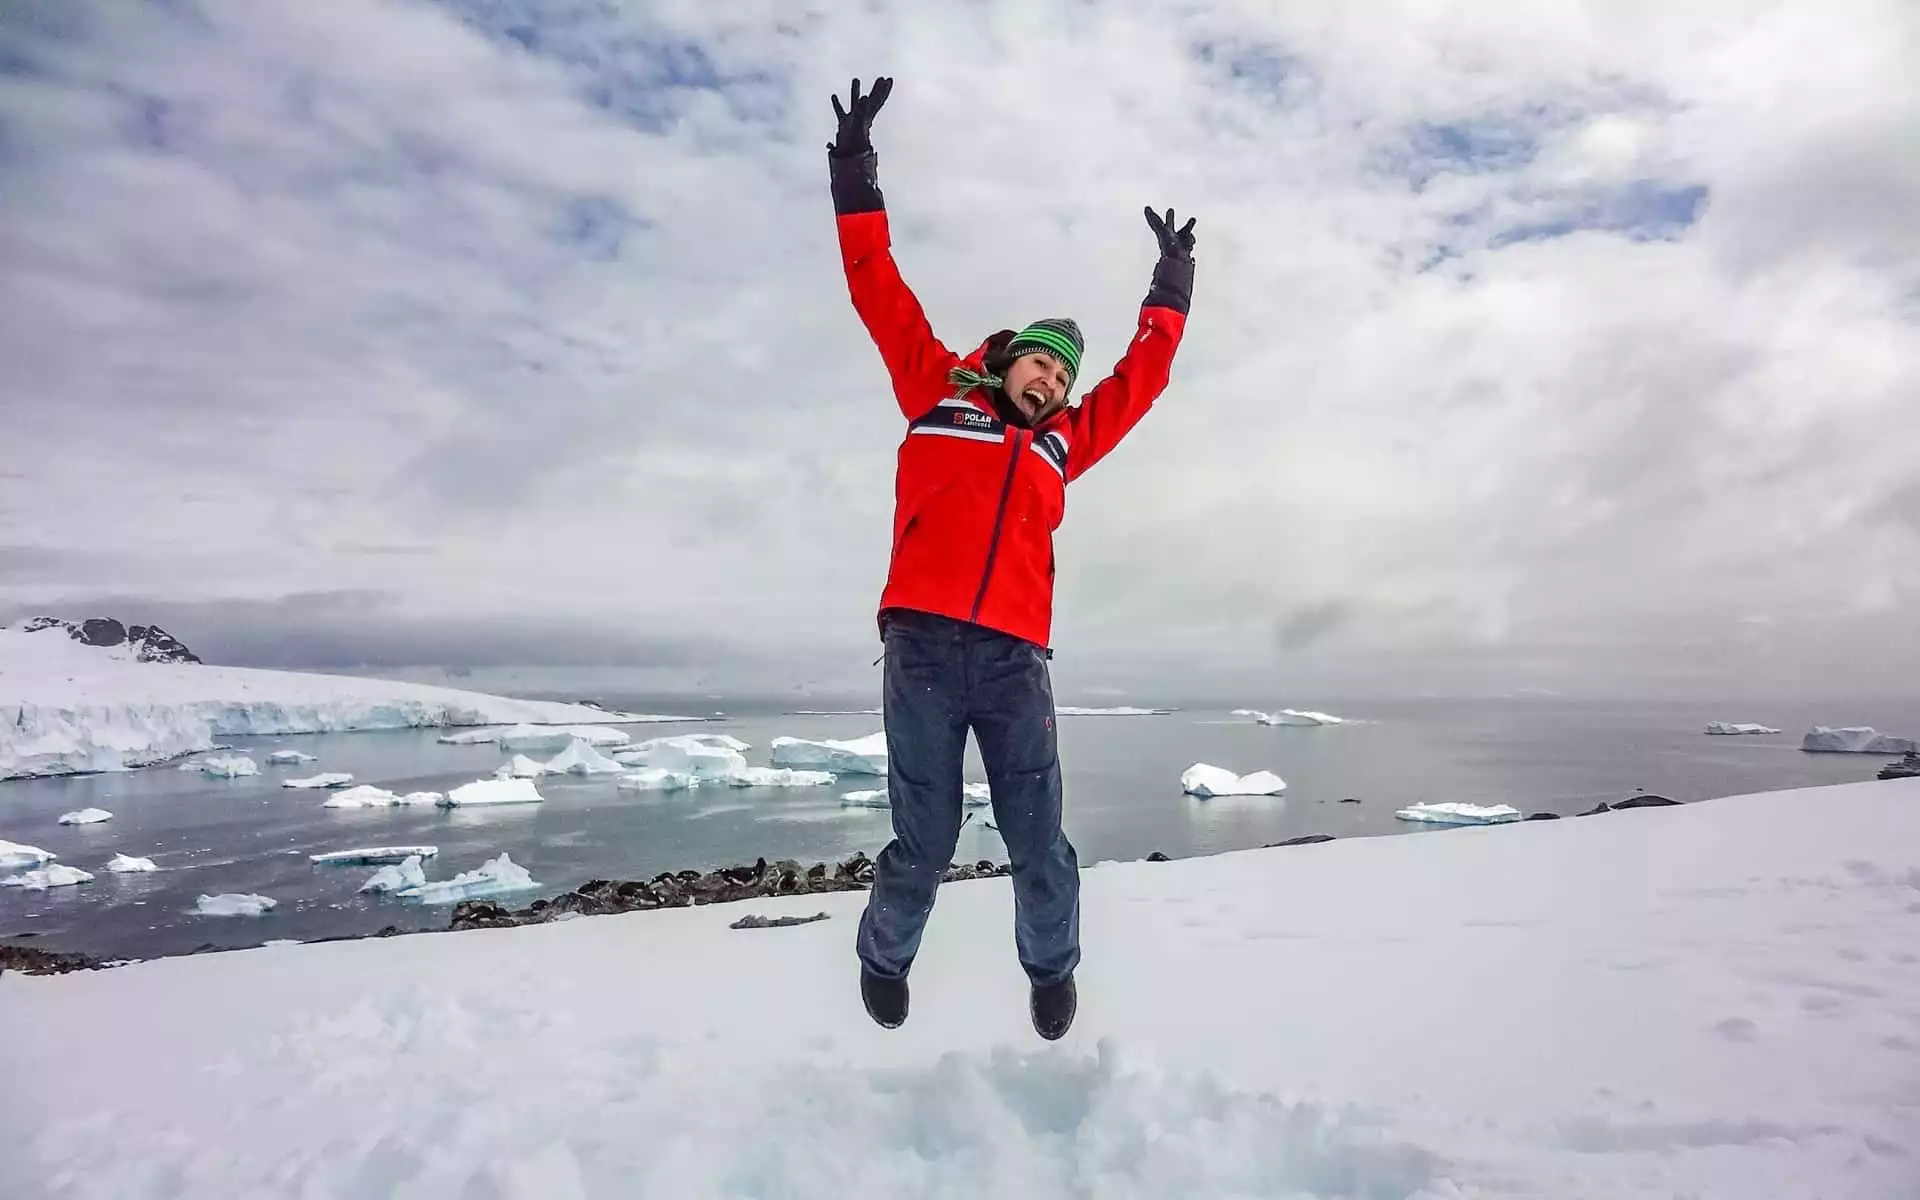 Solo woman traveler jumping on a snow hill overlooking Antarctica's coastline.